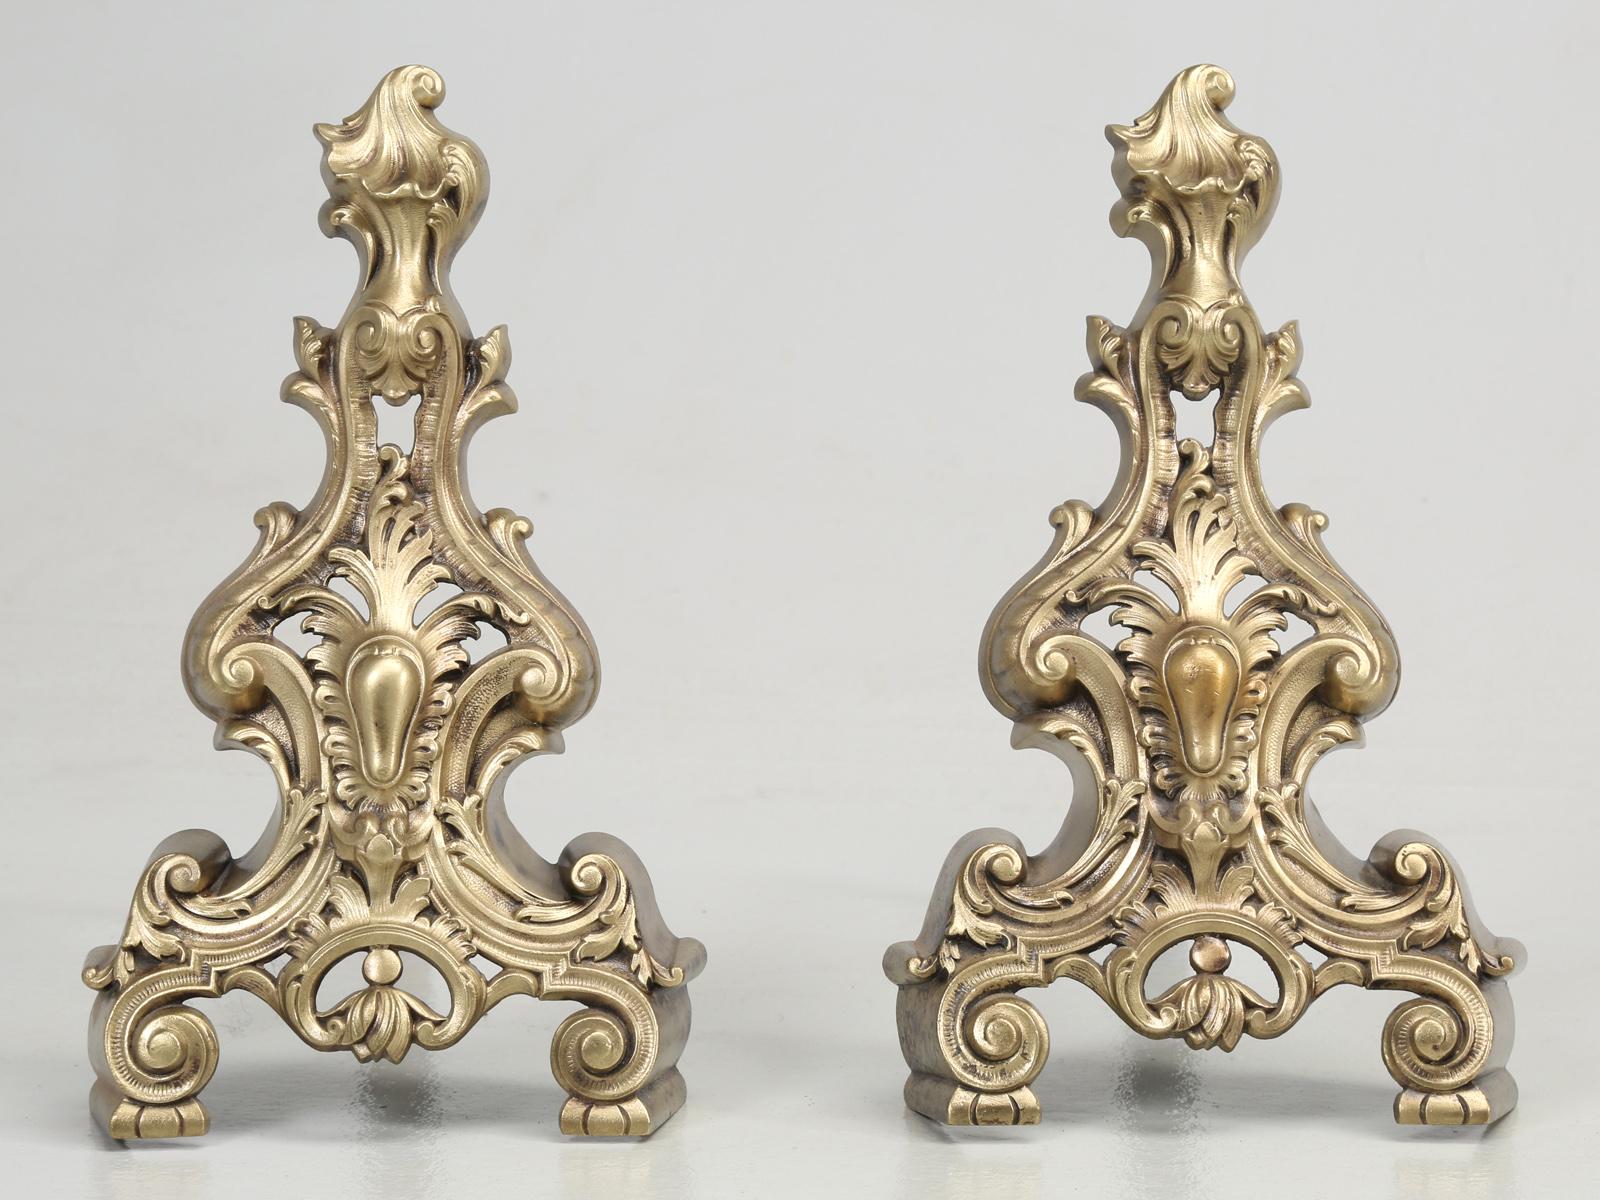 Pair of antique French bronze, Rococo style andirons that came from Toulouse. During the 19th century, the word; Rococo, described architecture and music, which were excessively ornamental. Beginning in the mid-19th century, Rococo was finally